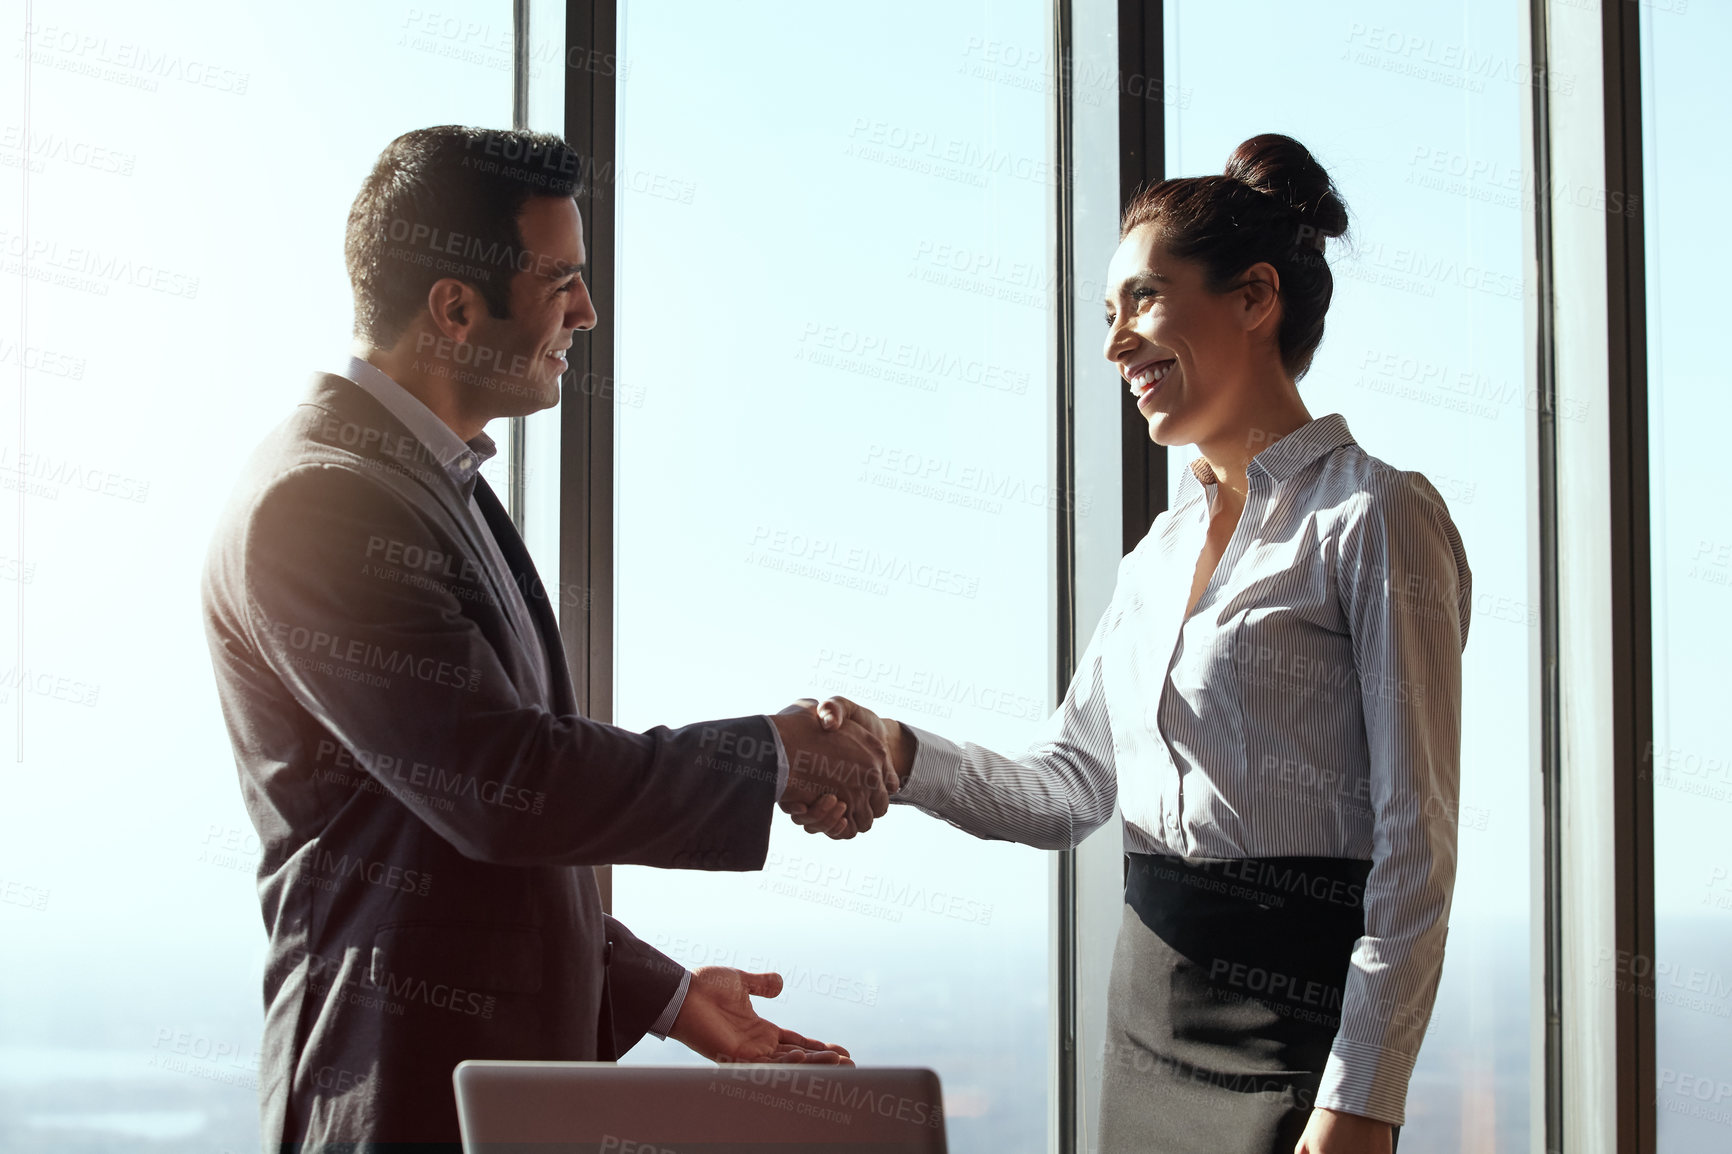 Buy stock photo Cropped shot of two young businesspeople shaking hands in their office